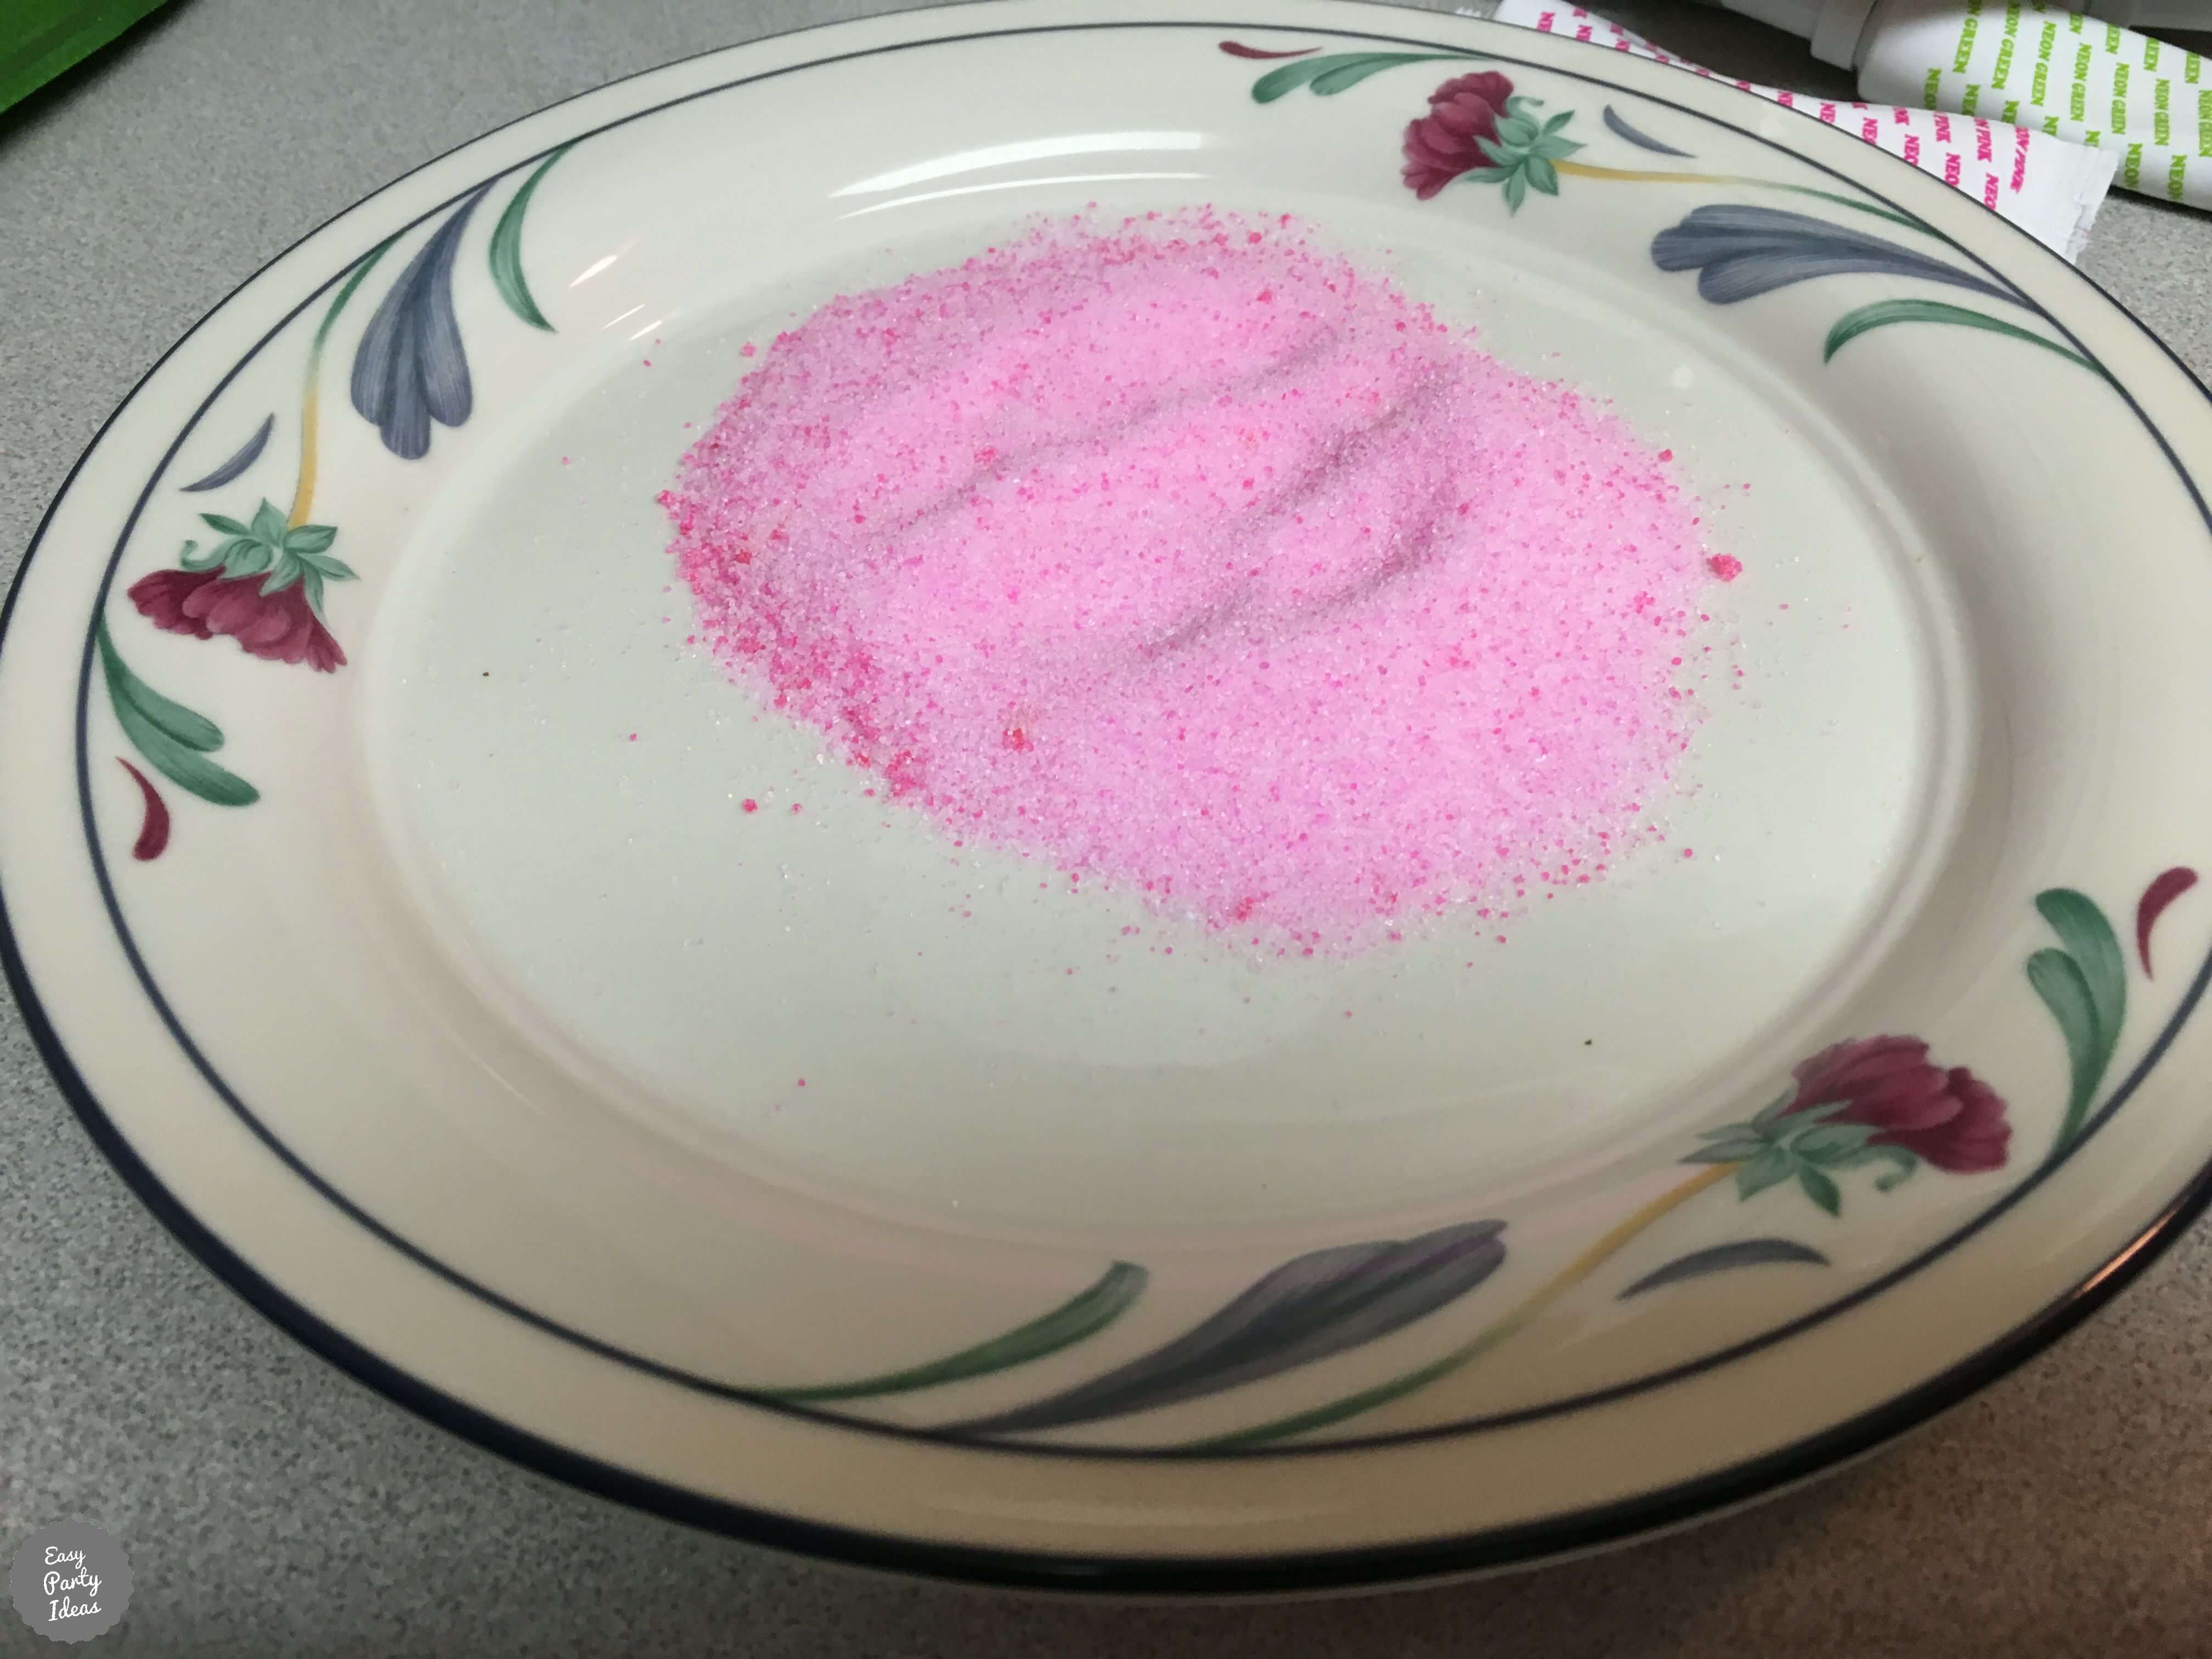 How to Make Colored Sugar